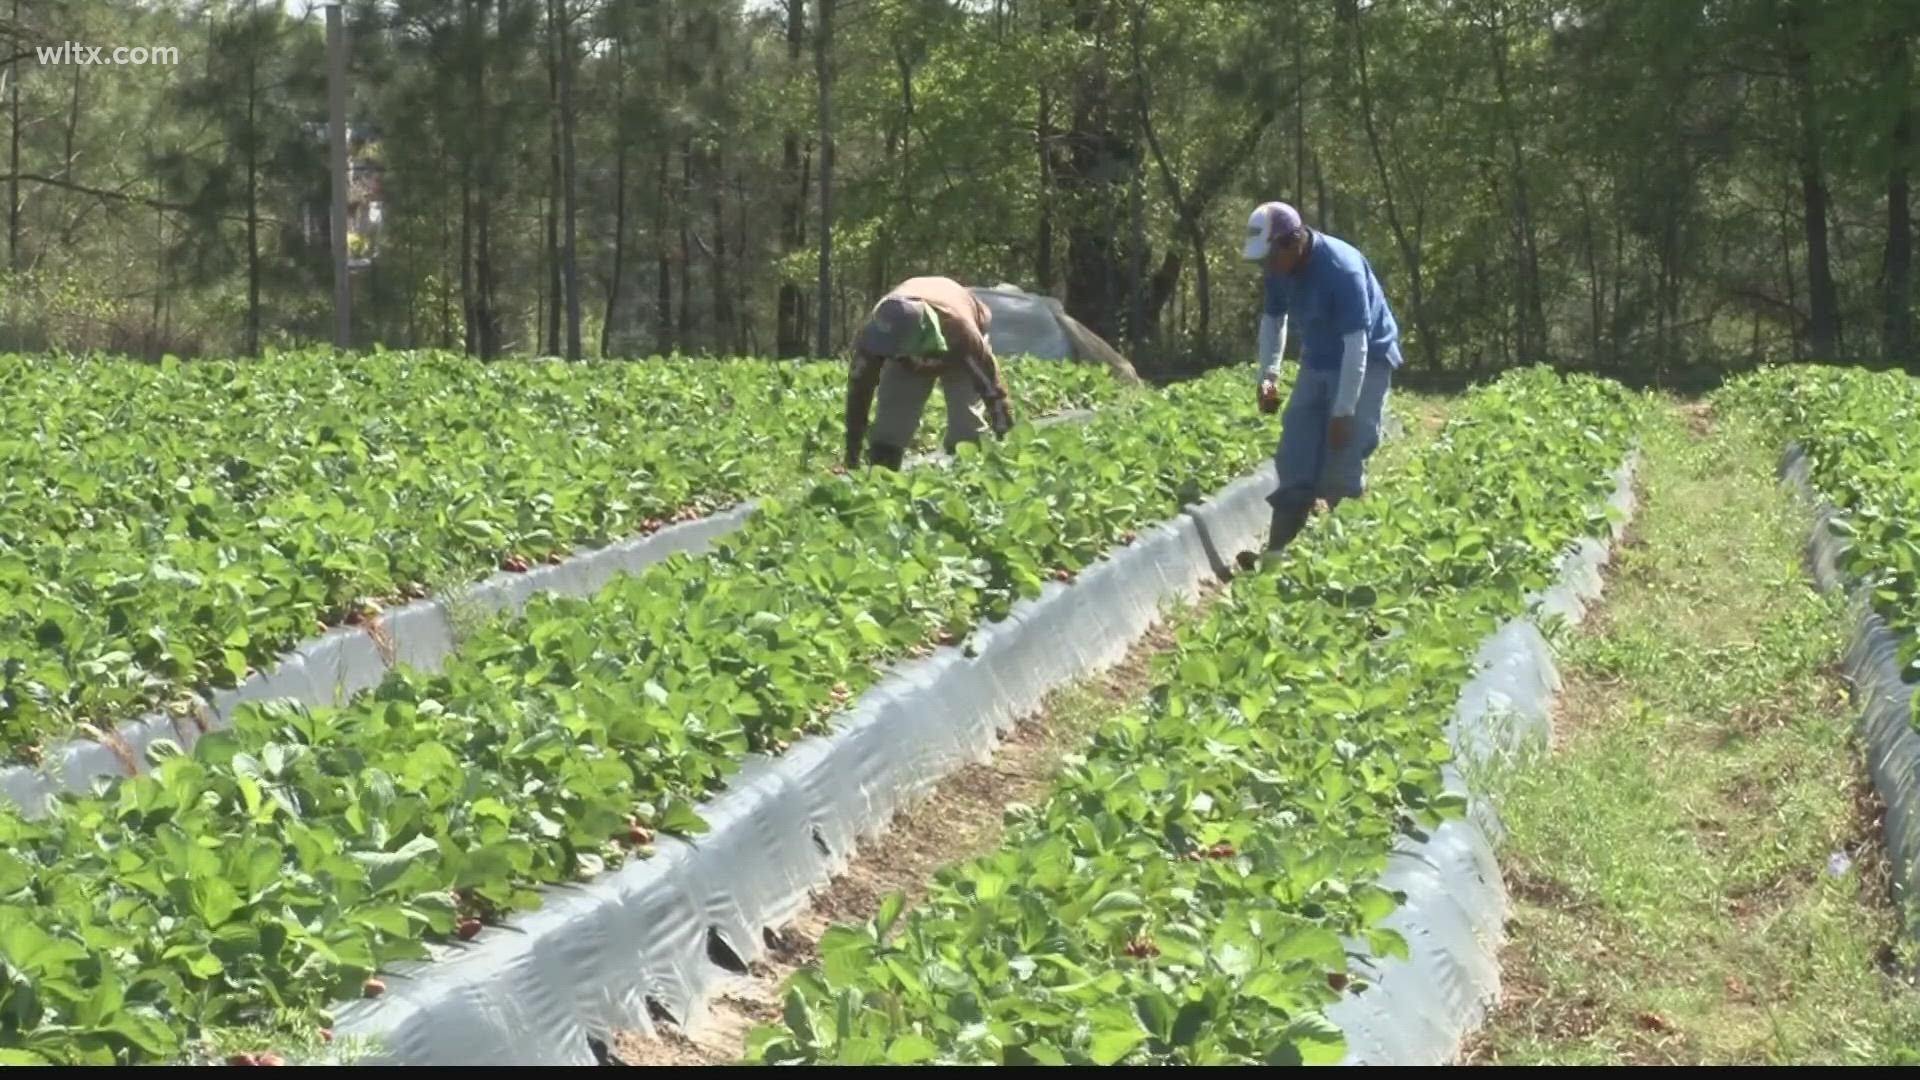 The non-profit looks to help minority farmers apply for grants.